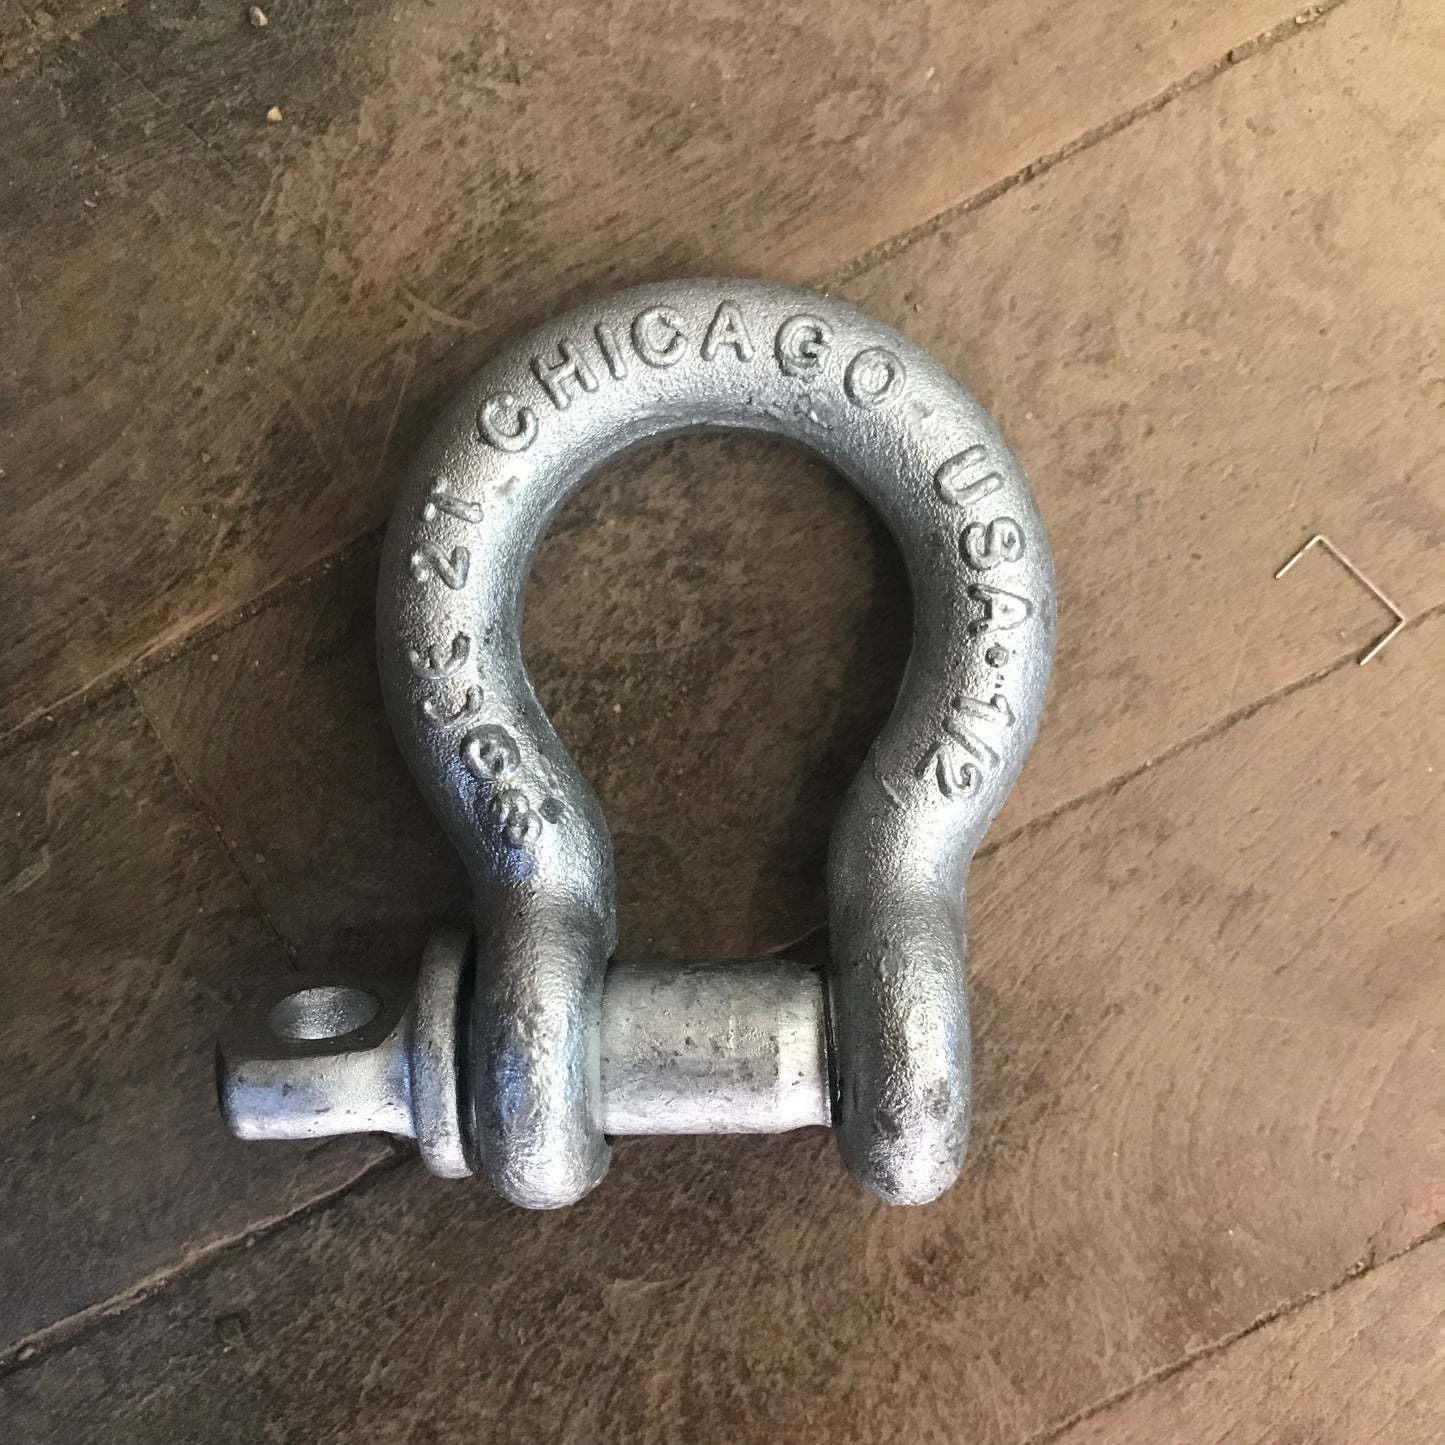 Chicago Hardware 1/2" Galvanized Anchor Screw Pin Shackle (20130-8)